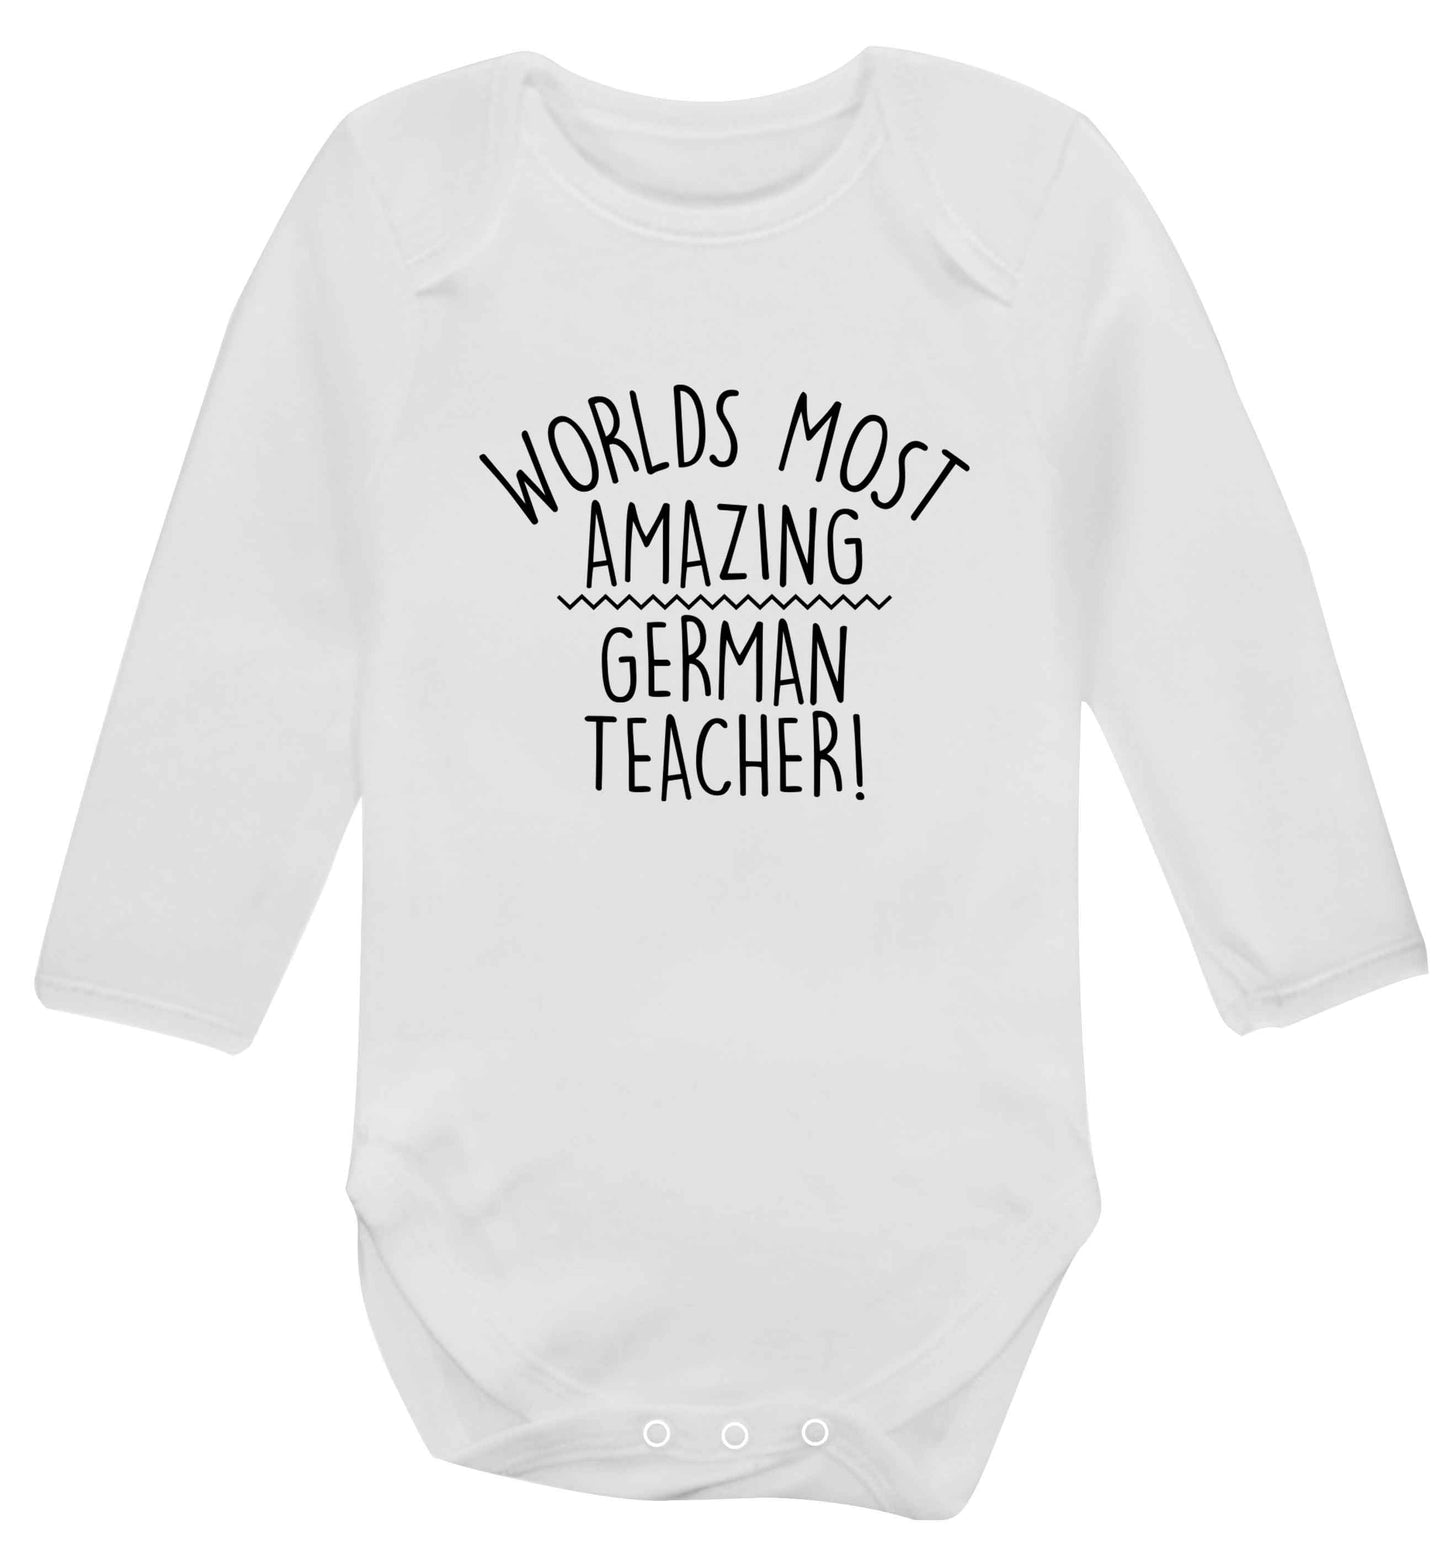 Worlds most amazing German teacher baby vest long sleeved white 6-12 months